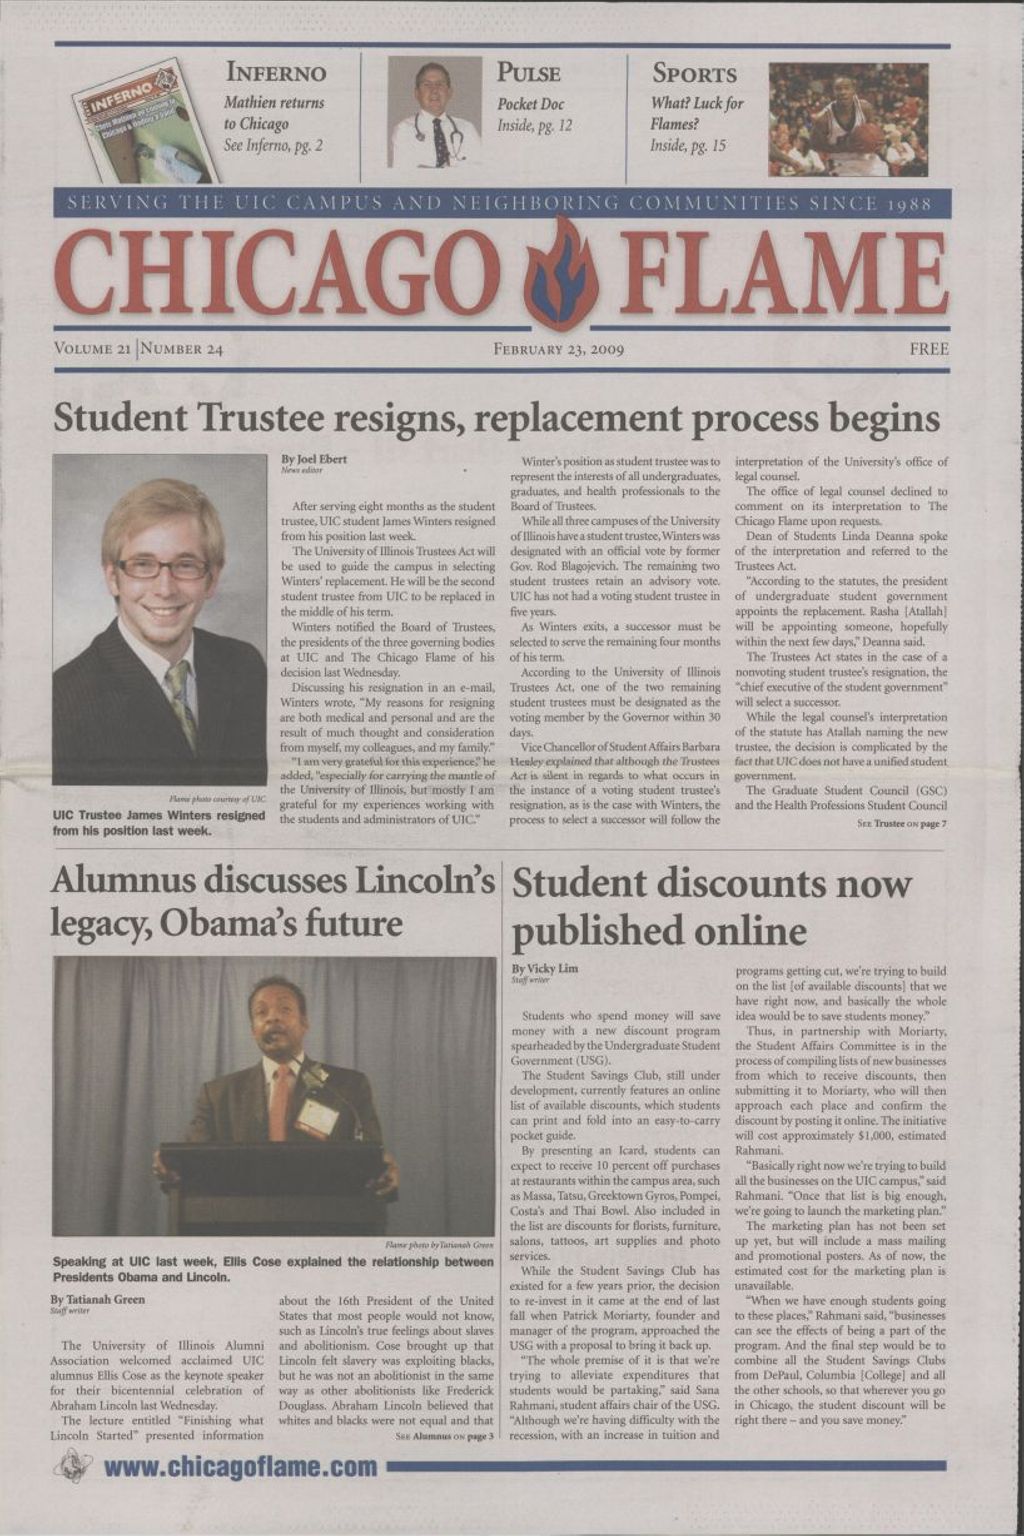 Miniature of Chicago Flame (February 23, 2009)